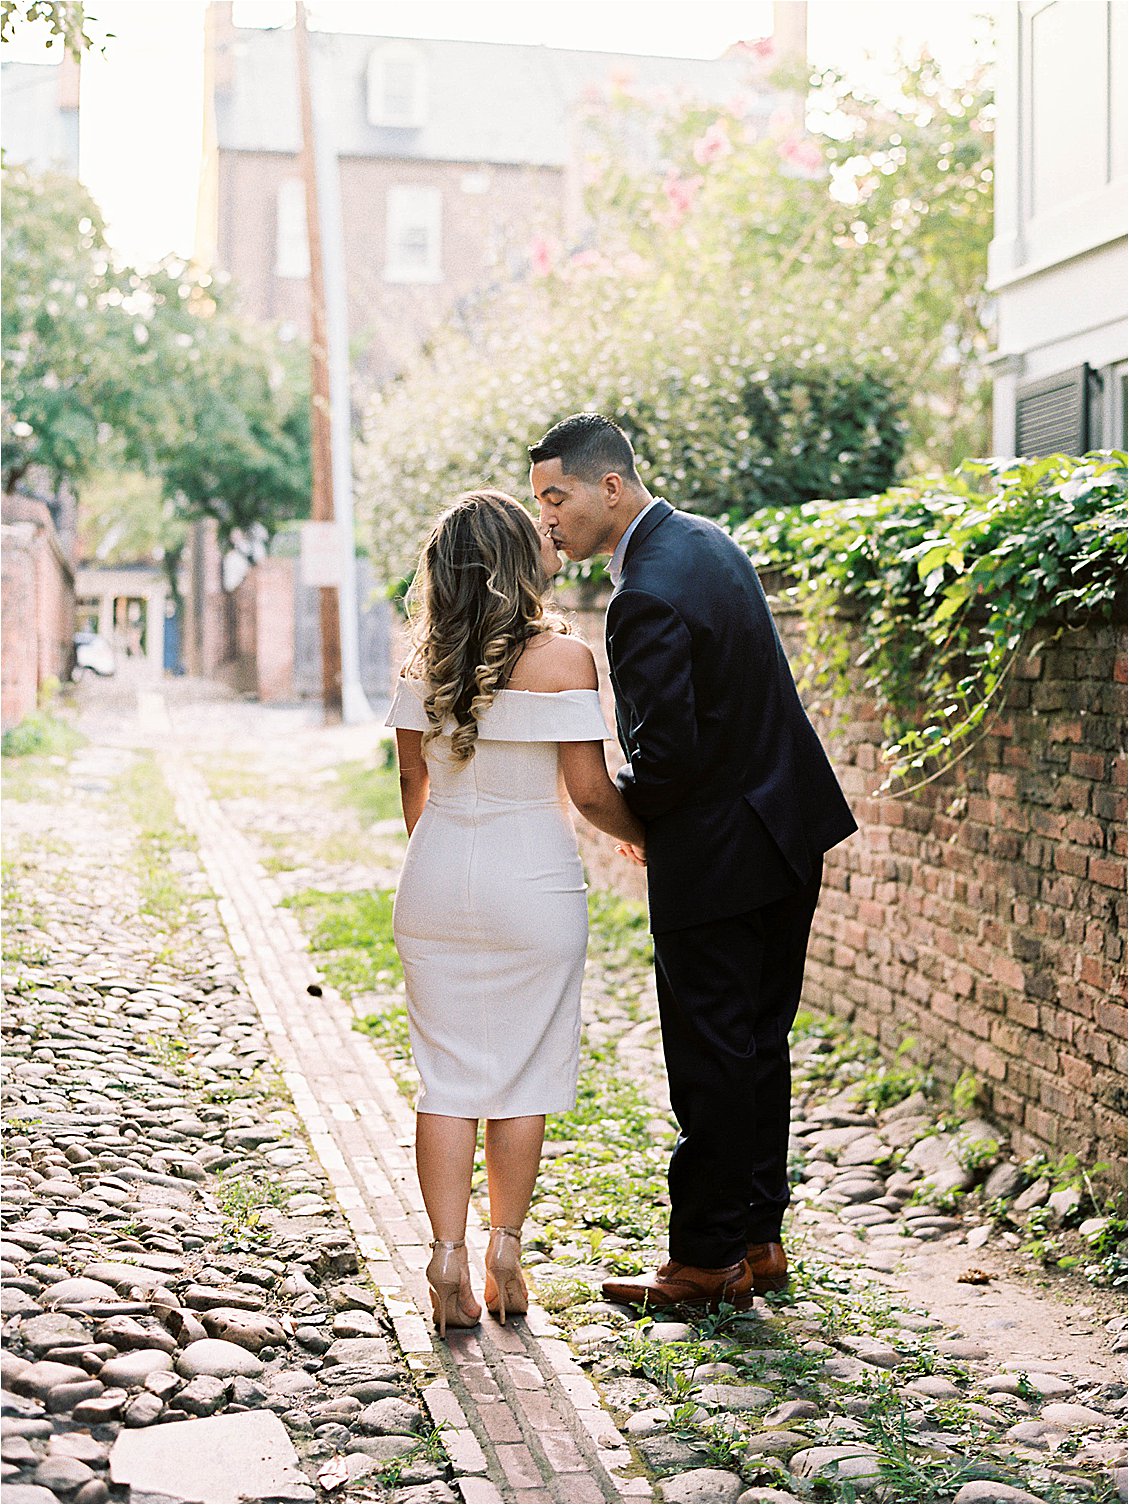 Wales Alley engagement session with destination film wedding photographer, Renee Hollingshead